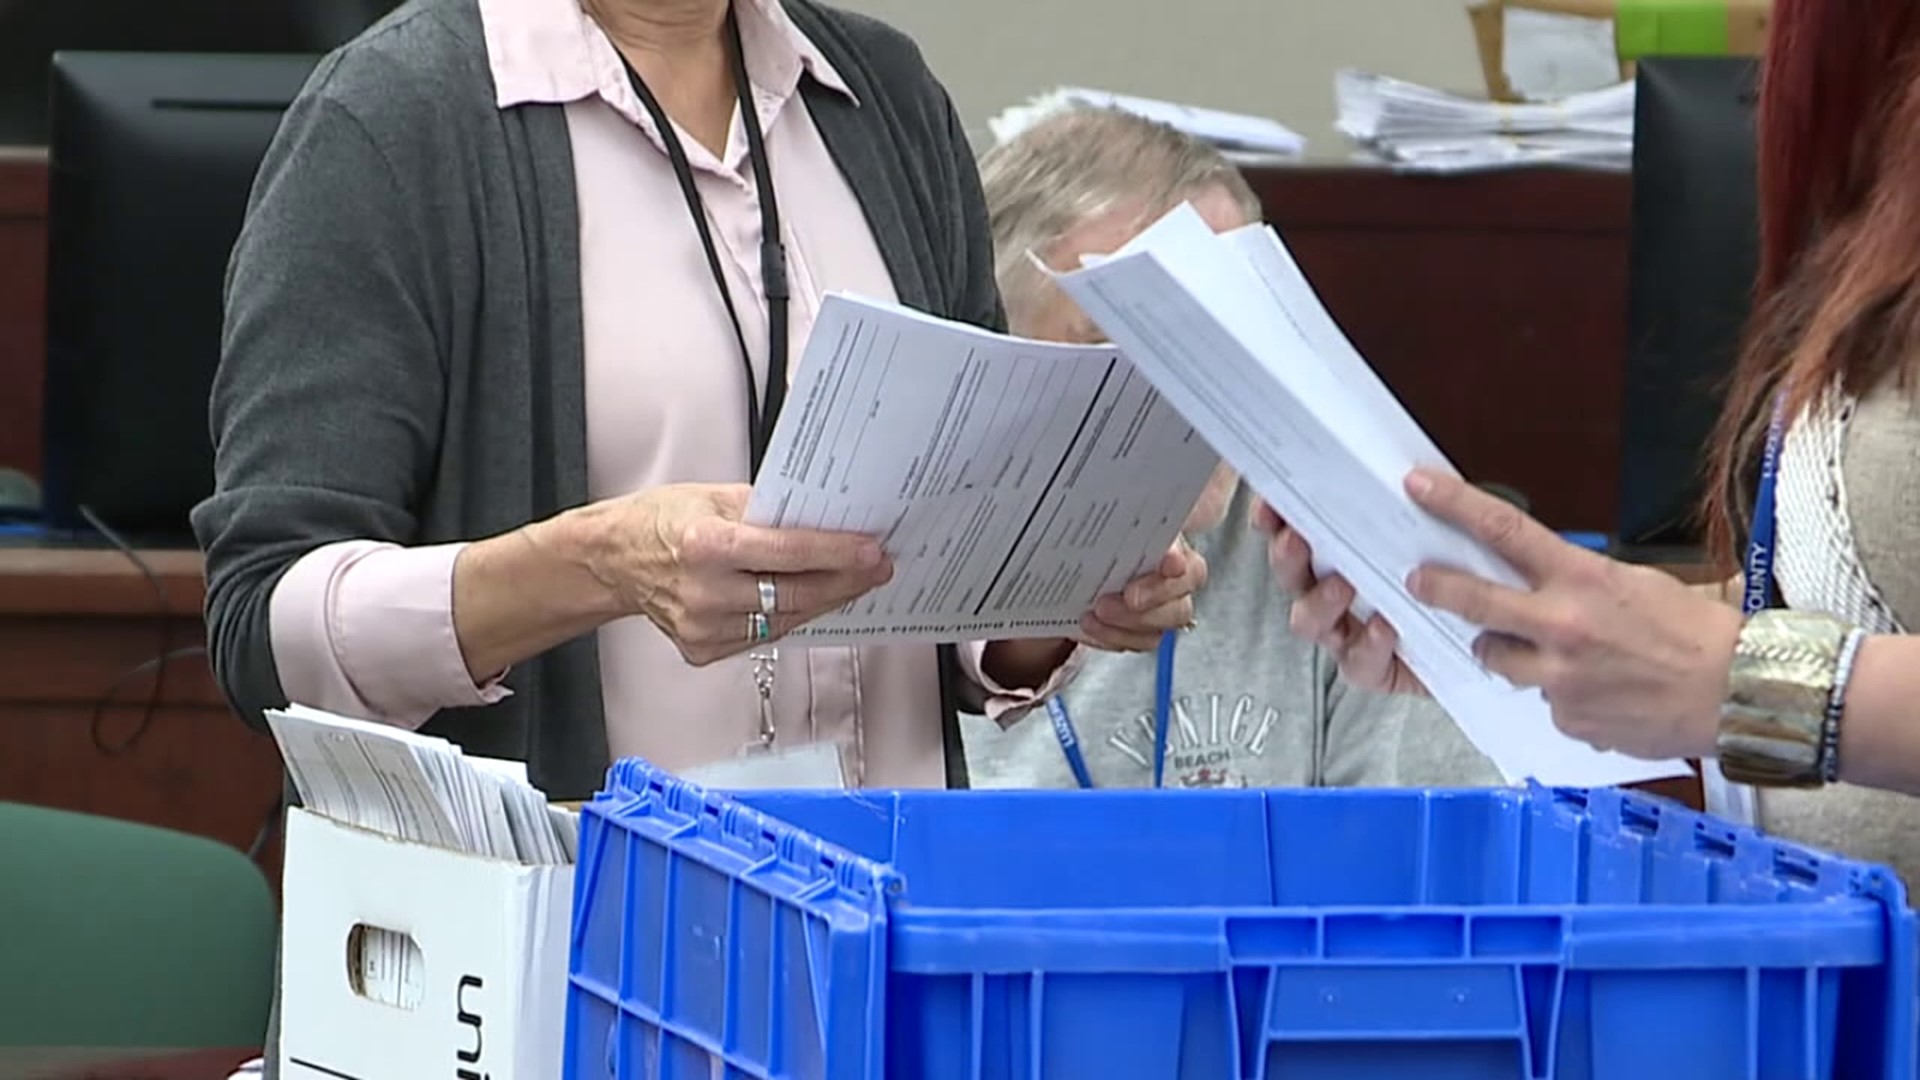 Officials from Harrisburg came to Luzerne County to talk about how to make the process of voting in the upcoming primary election easier for voters.